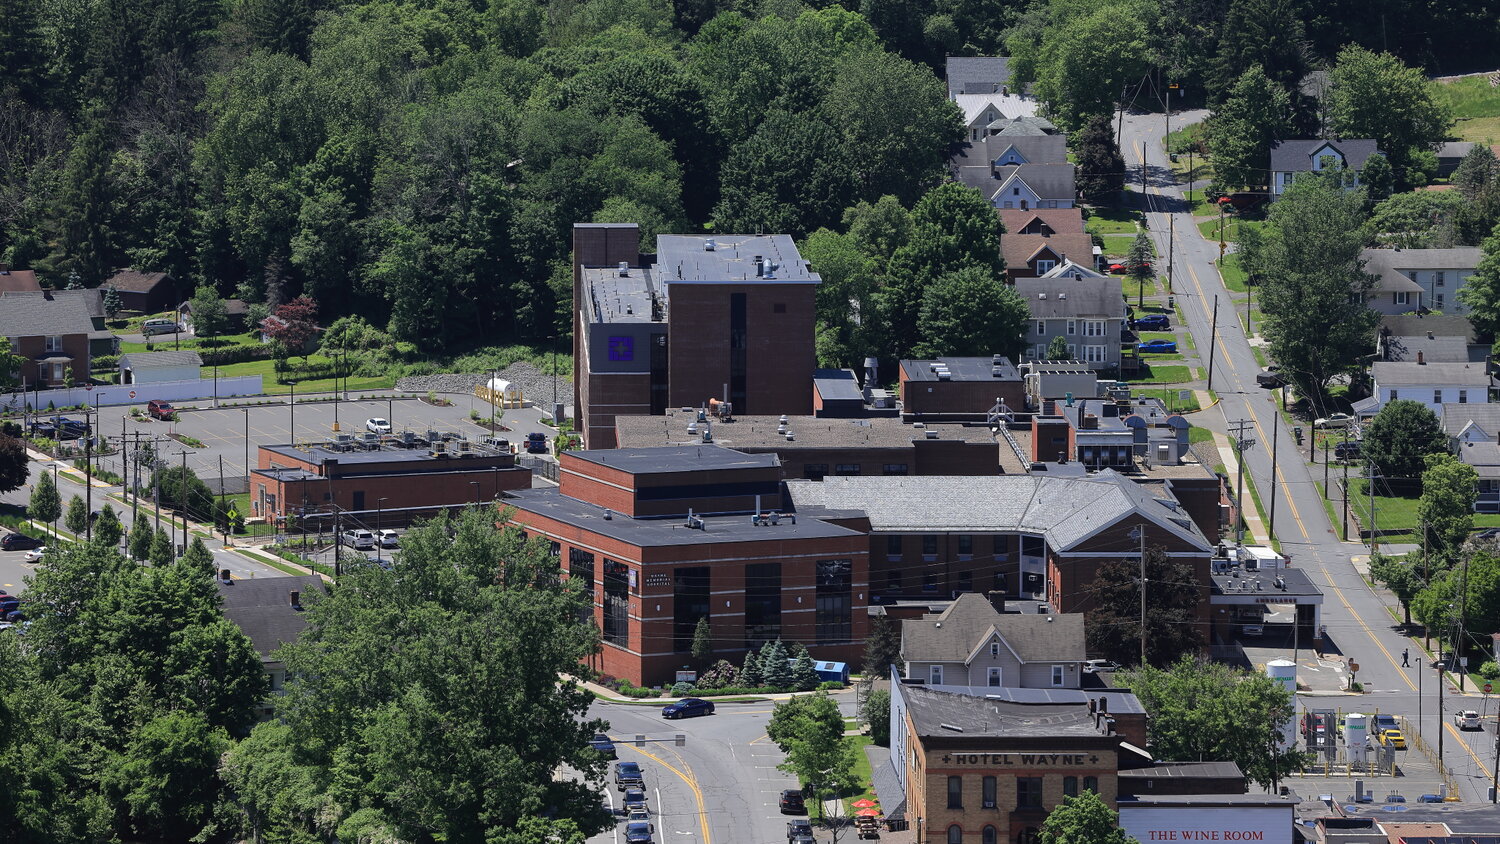 Wayne Memorial Hospital is pictured from Irving Cliff, above the Borough of Honesdale's downtown district.